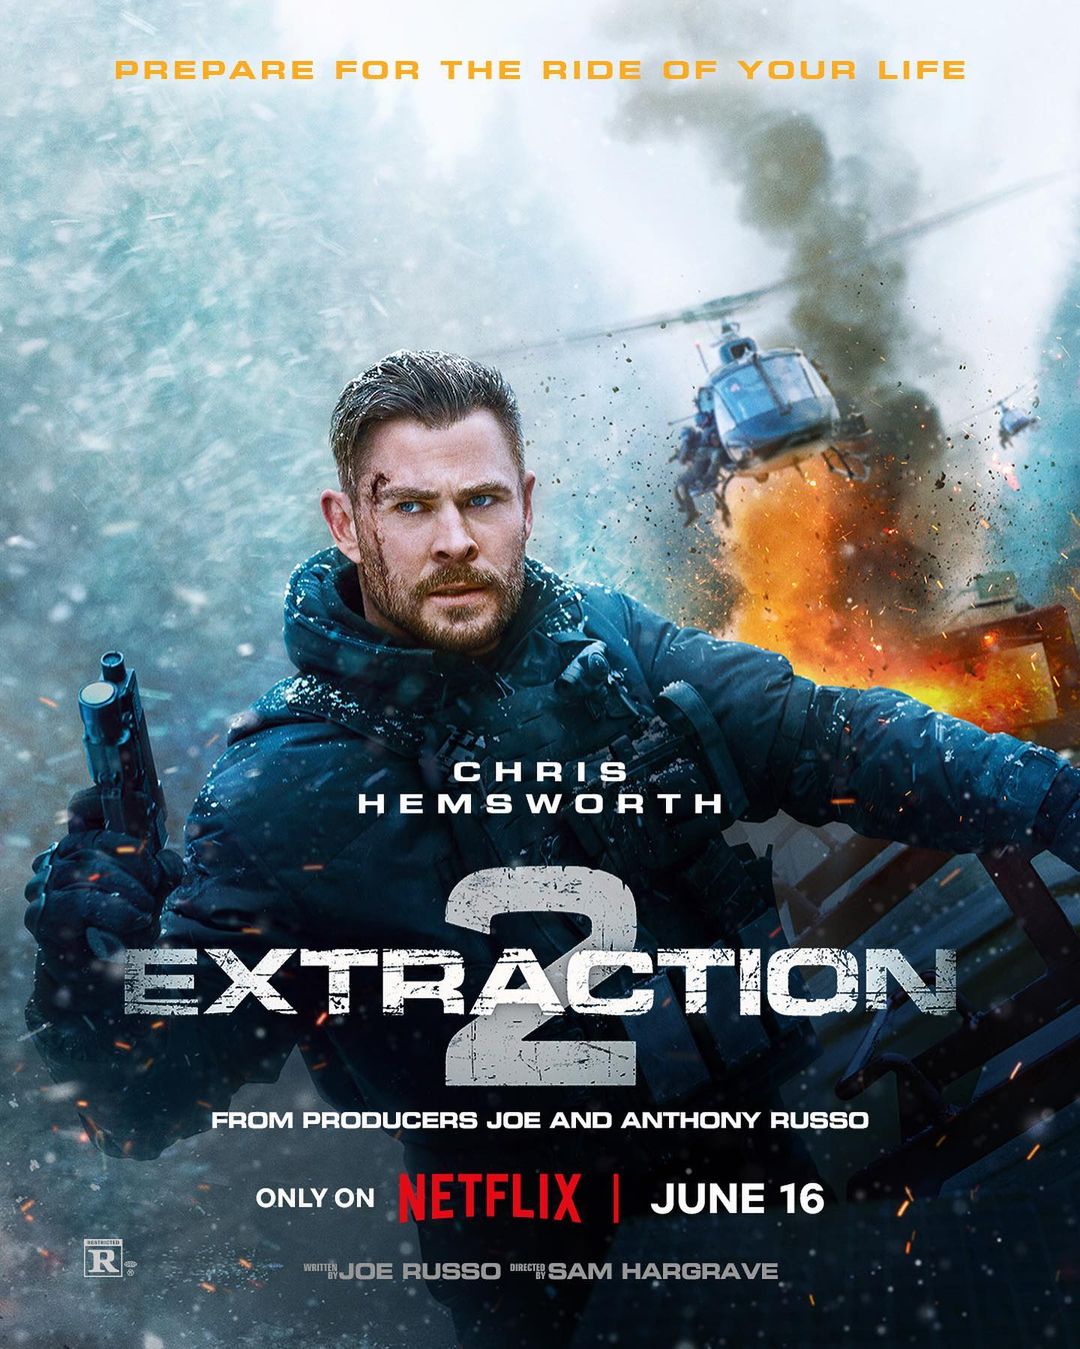 One of the official posters for "Extraction 2"